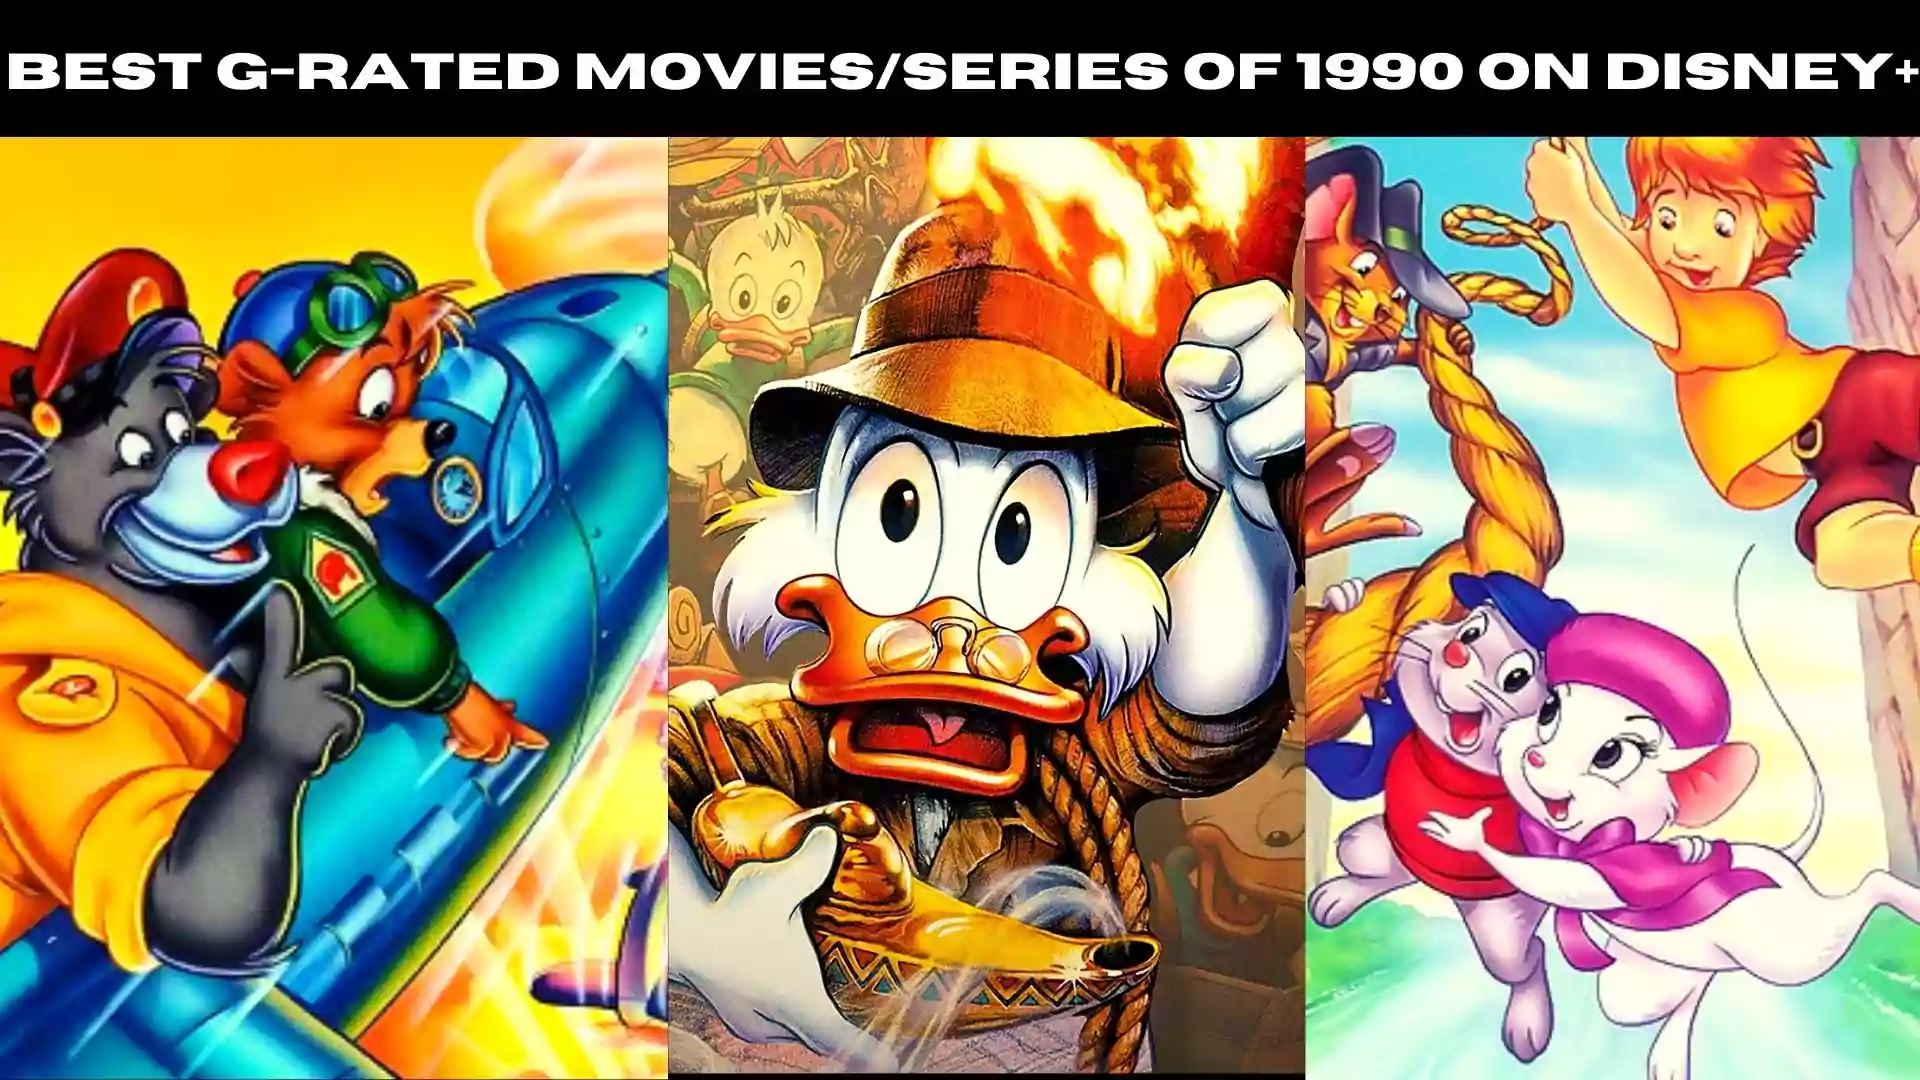 Best G-Rated Movies/series of 1990 on Disney+